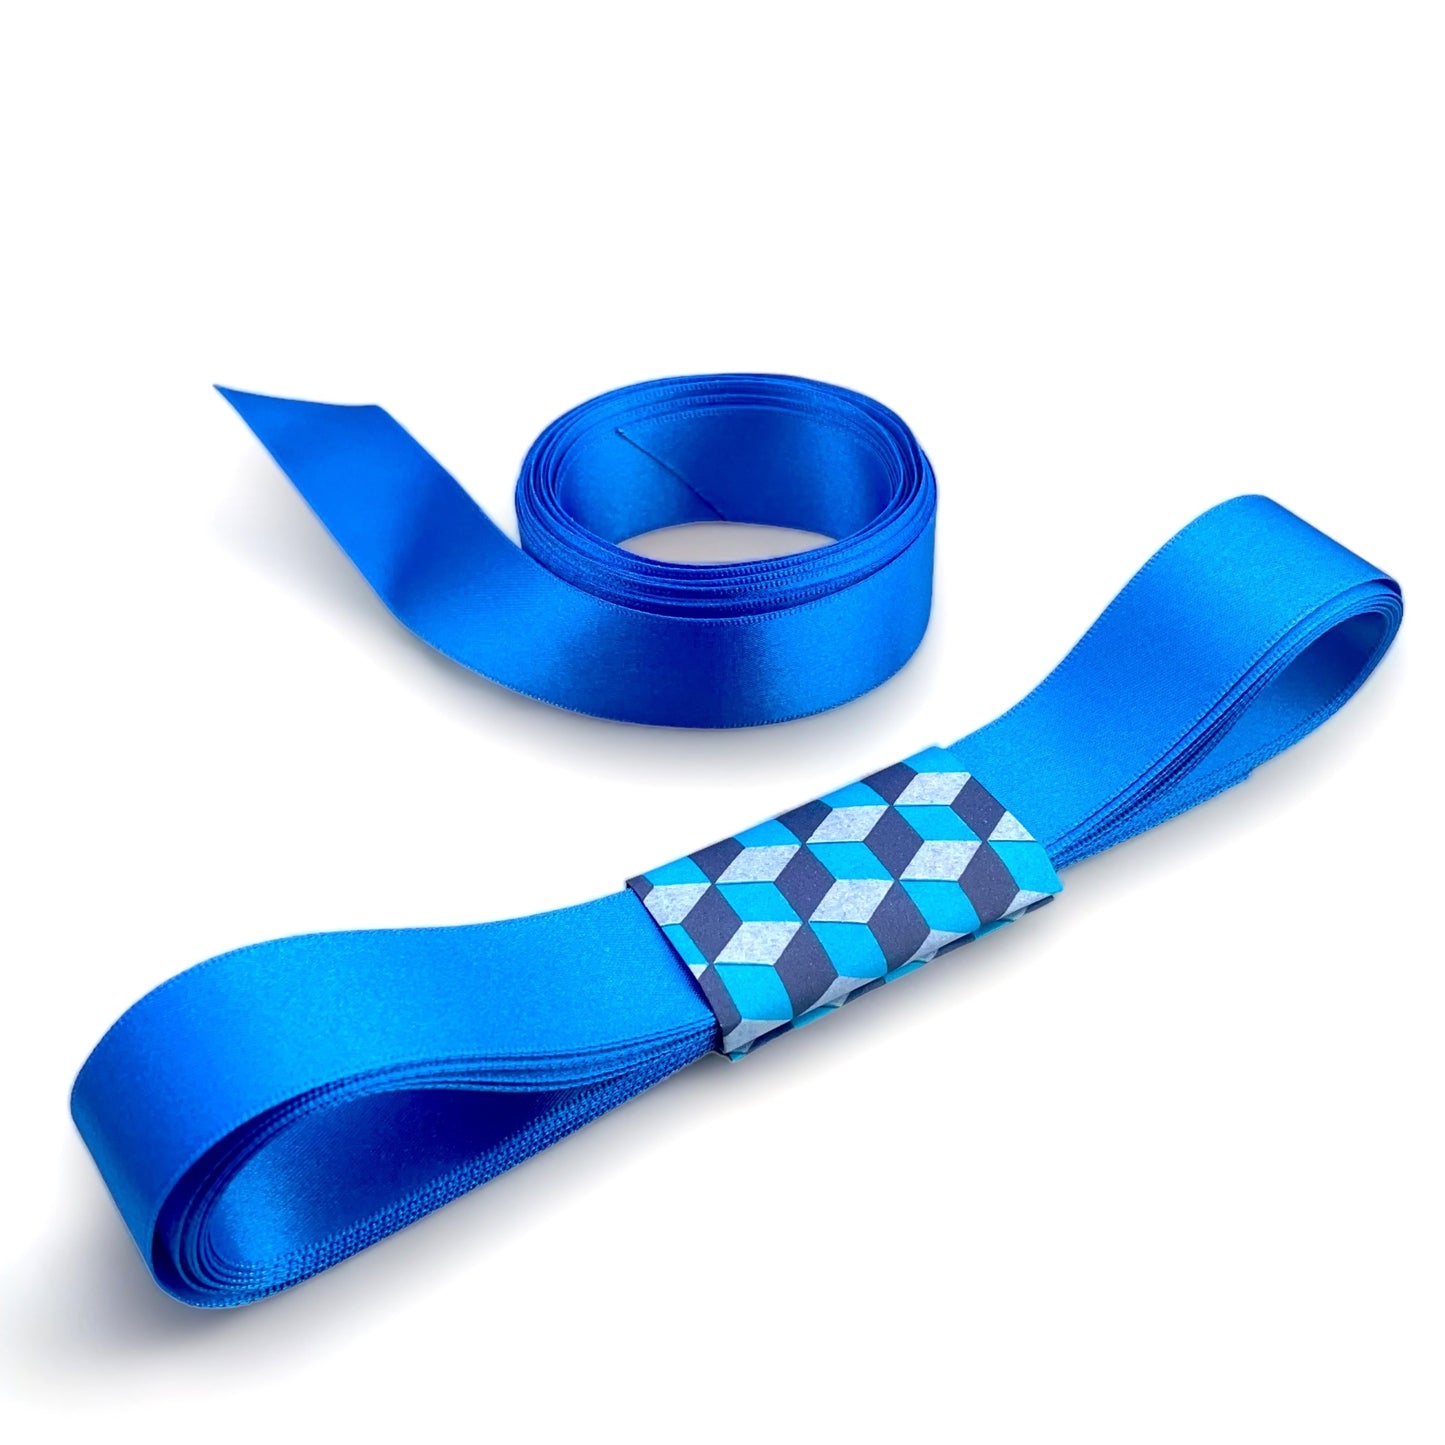 Satin ribbon 25mm wide and 5 metres long, presented with a patterned paper band. colour - royal blue